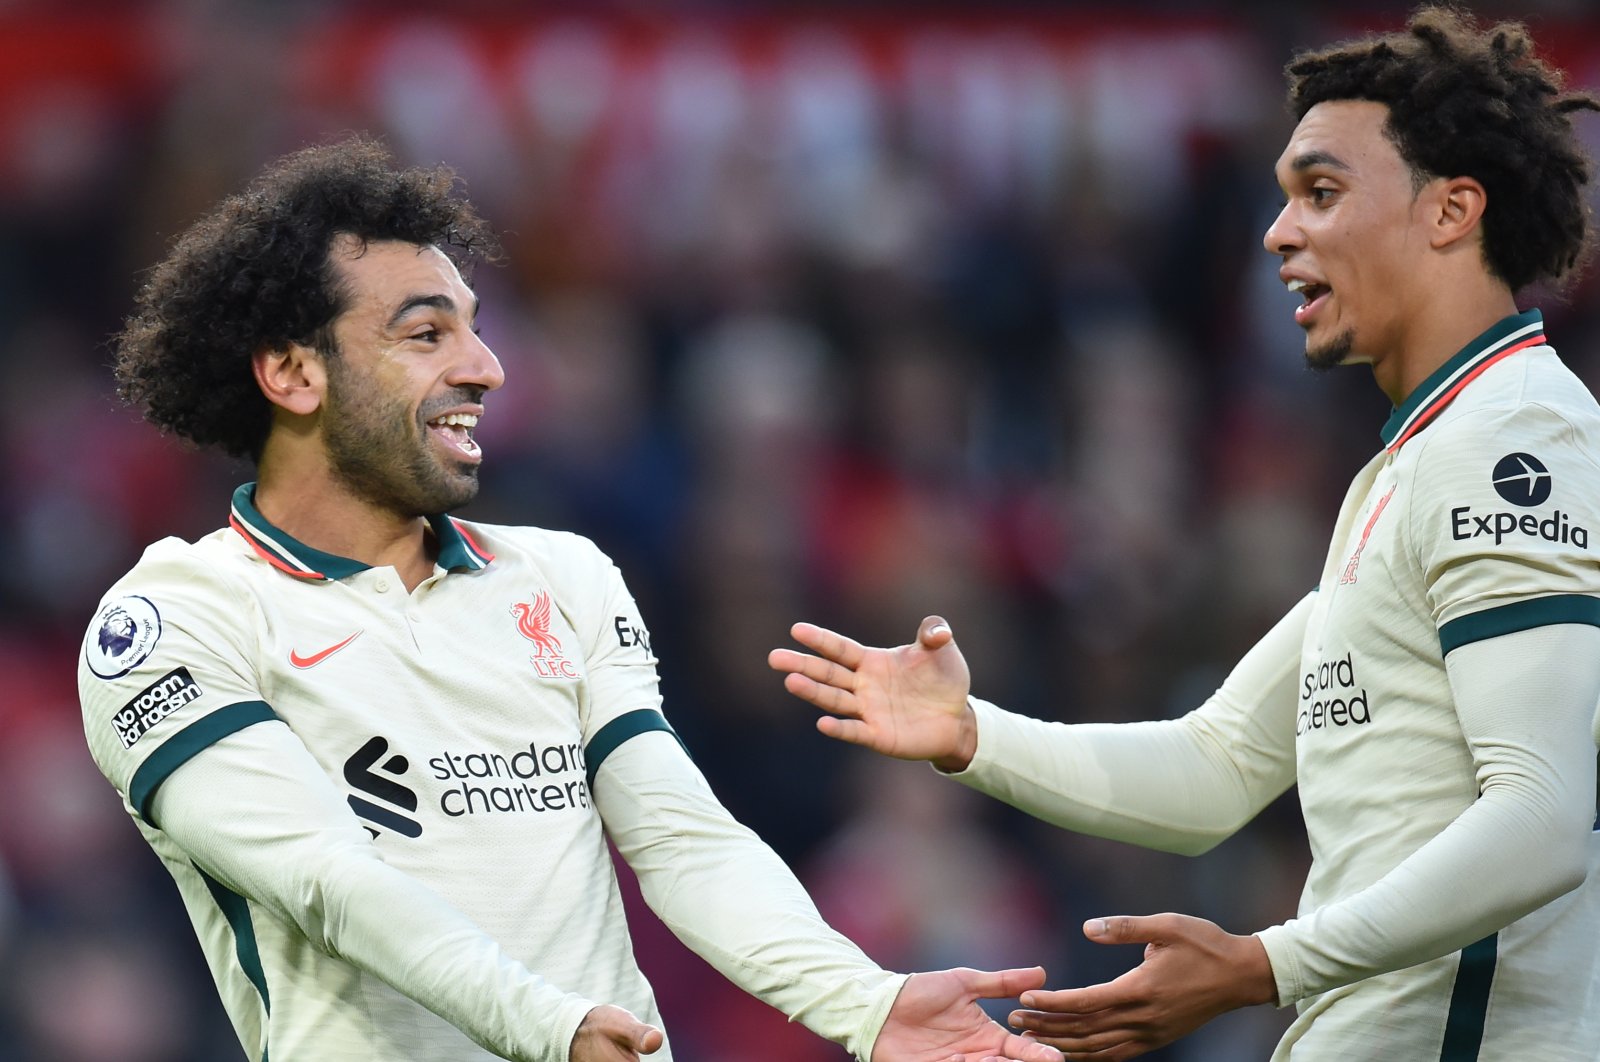 Liverpool's Mohamed Salah (L) celebrates with Trent Alexander-Arnold (R) after scoring the 0-3 goal during the English Premier League soccer match between Manchester United and Liverpool FC in Manchester, Britain, Oct. 24, 2021. (EPA Photo)